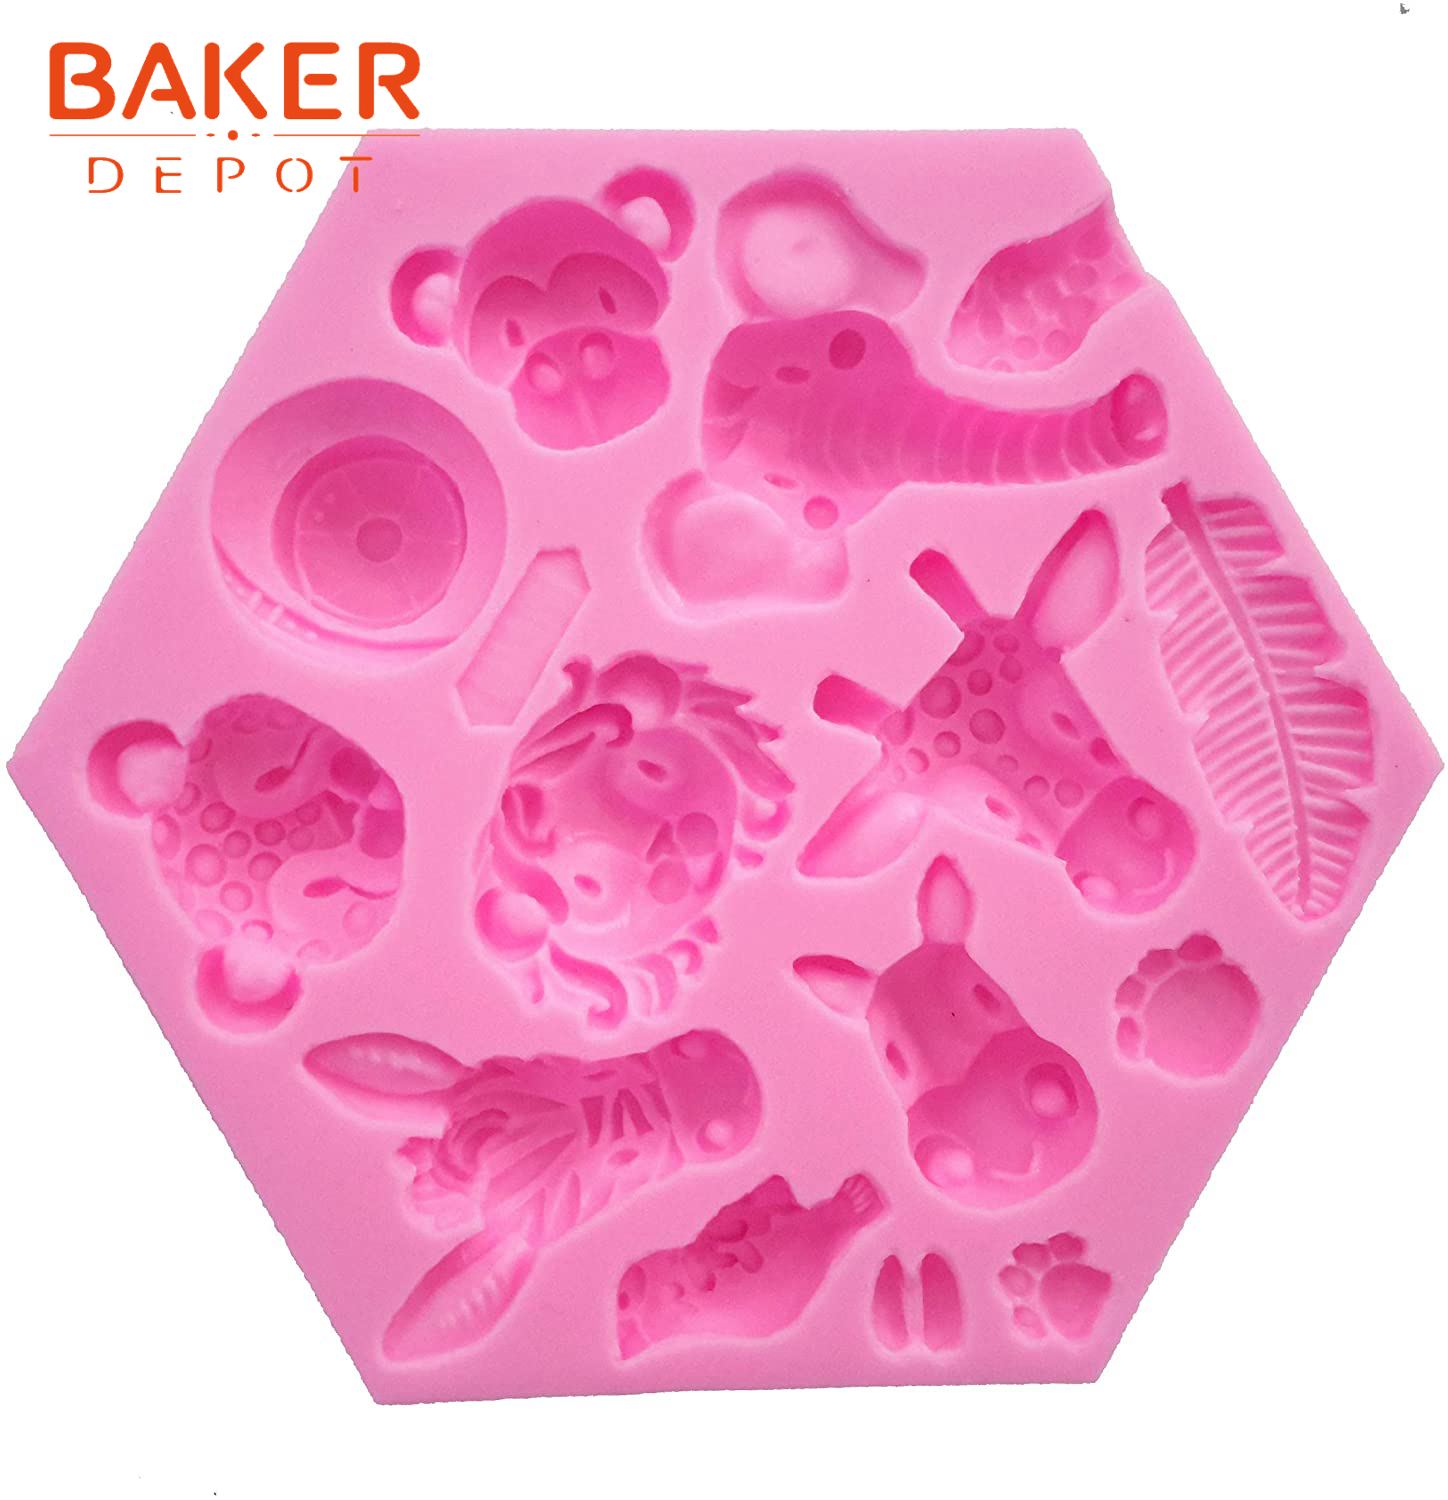 Cute Sugarcraft Silicone Gummy Molds Very Fun for Kids DIY Candy Mold  Chocolate Mold Animals, Fruits and Flowers Gummy Mold 